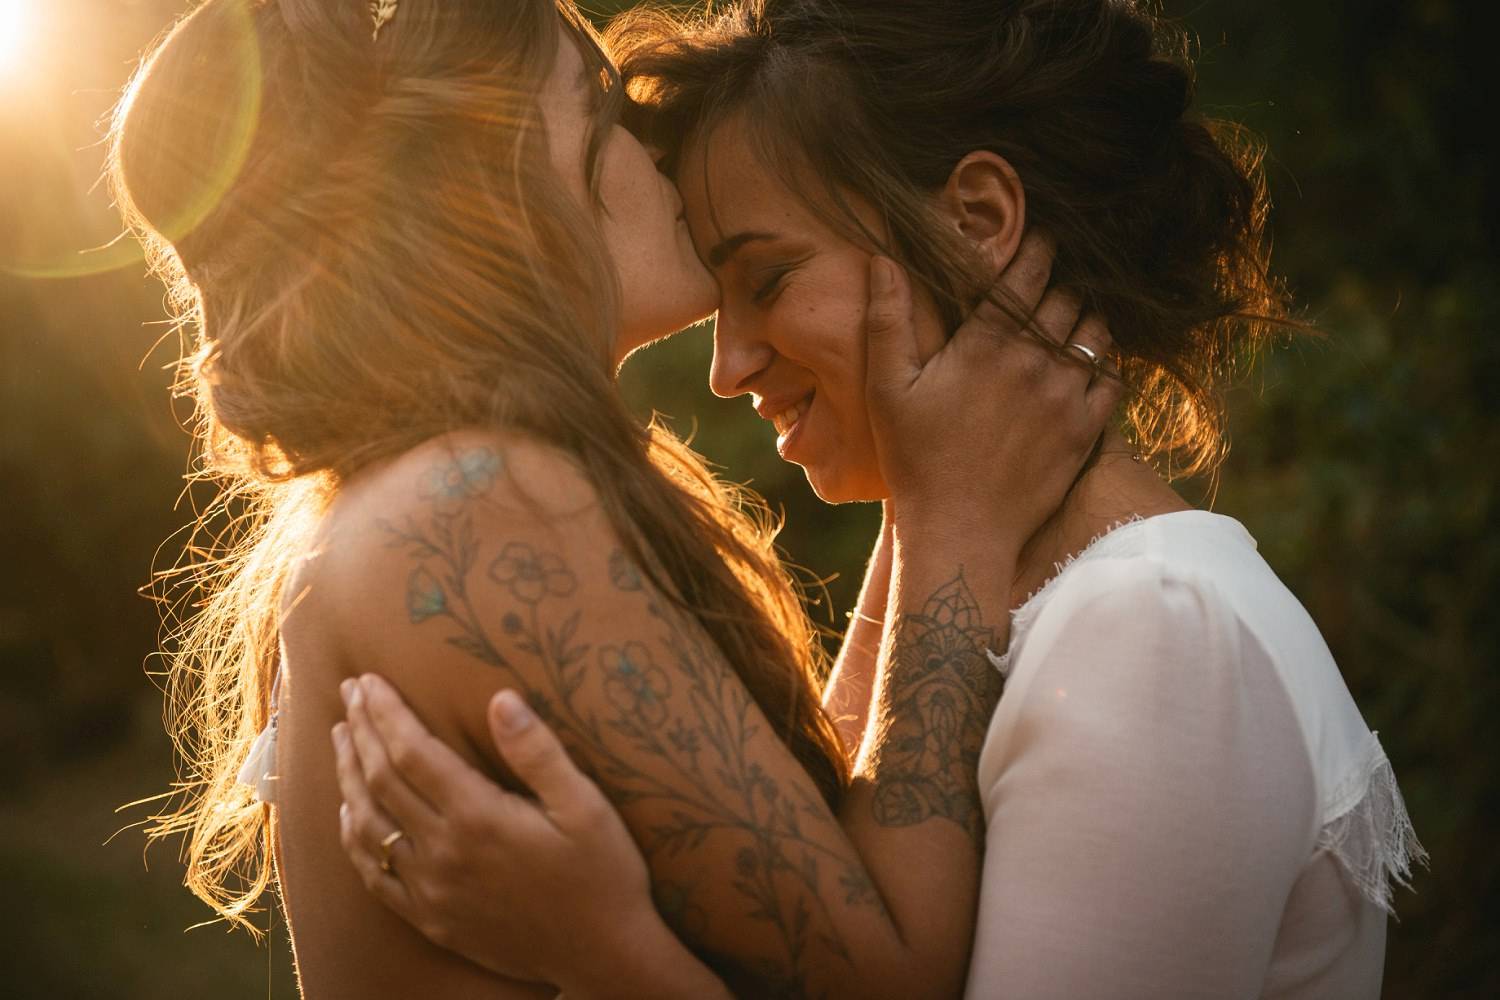 One bride kisses her new wife on the forehead as golden sunlight spills across them